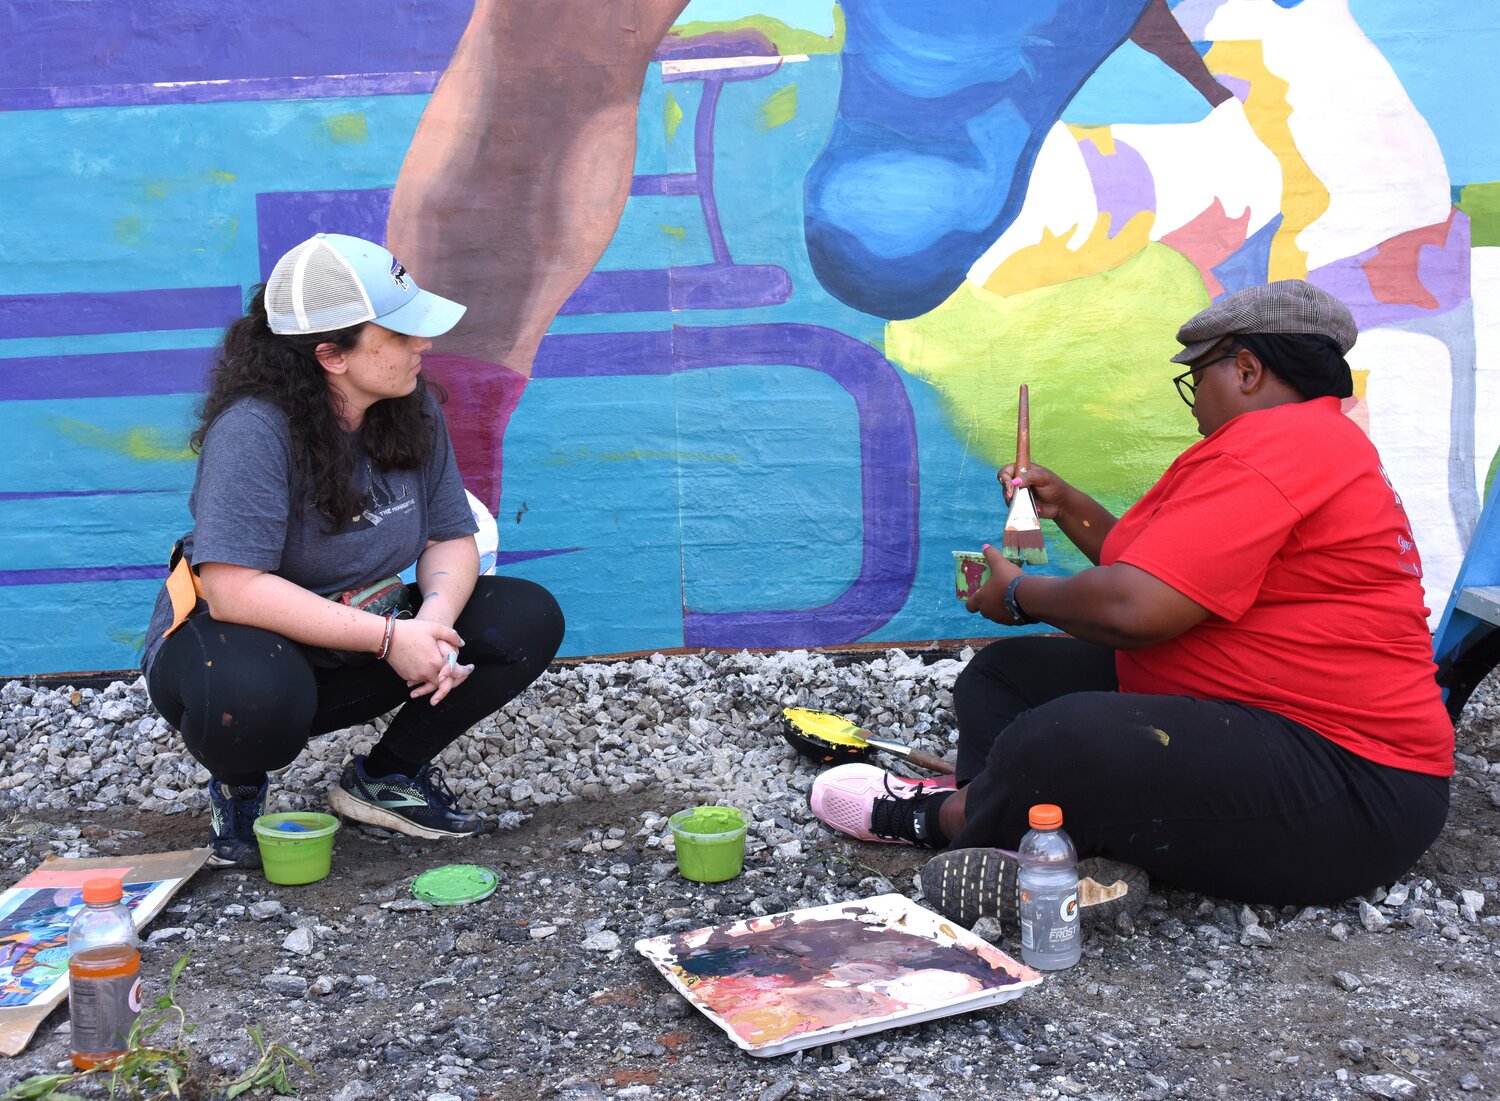 Stories shared in listening sessions drive mural designs - The Paper